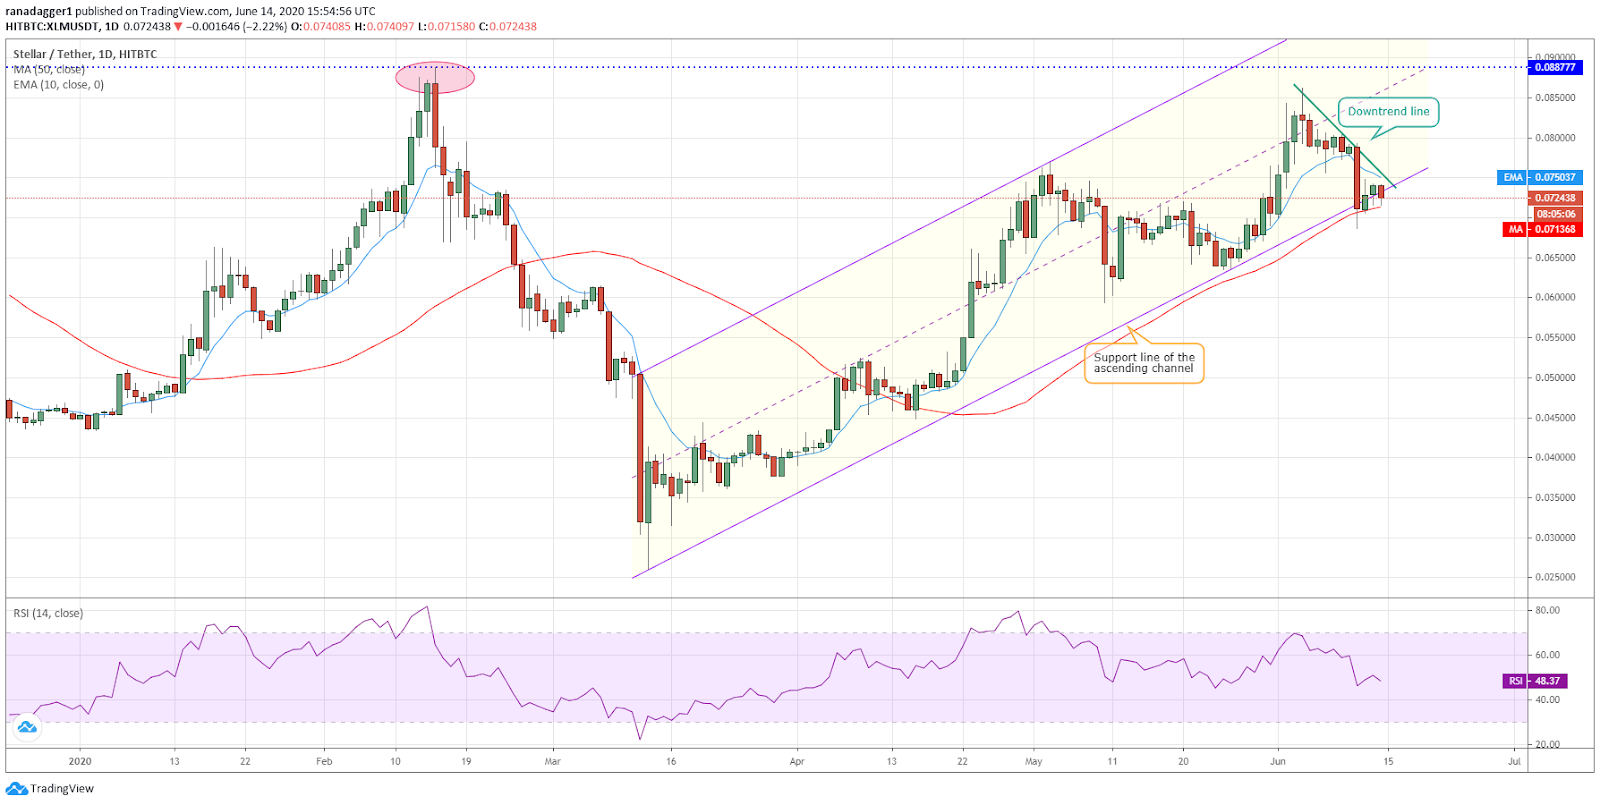 XLM/USD daily chart. Source: Tradingview